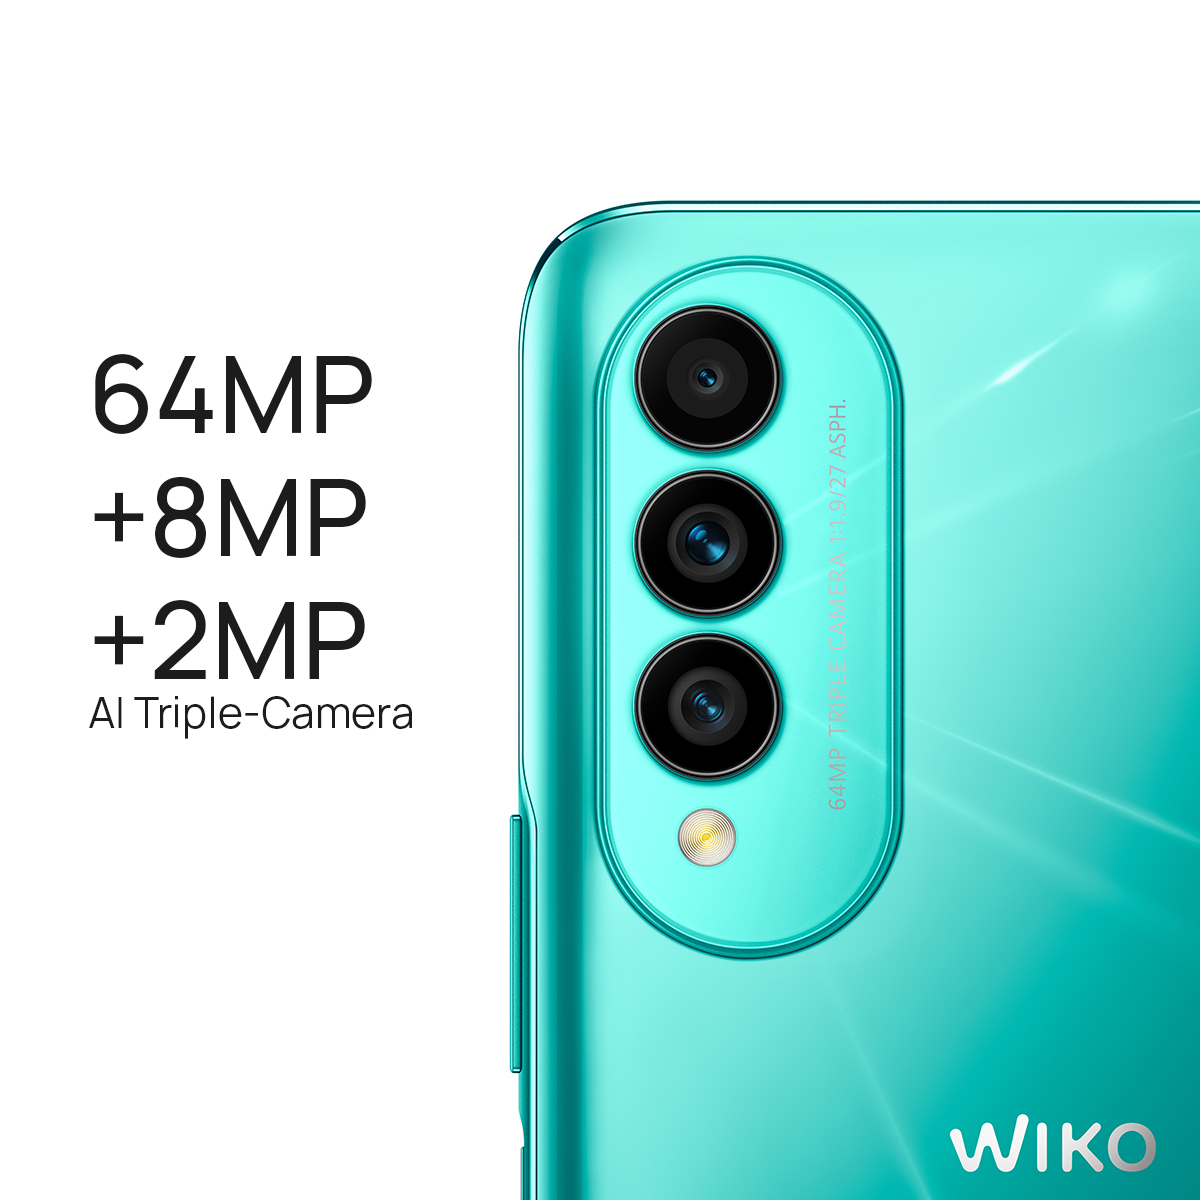 WIKO T50 Smartphone Helio G85 6GB RAM 128GB ROM 40W Fast Charge 64MP Triple  Camera 6.6 Inch FHD+ Display Mobile Phones 2022